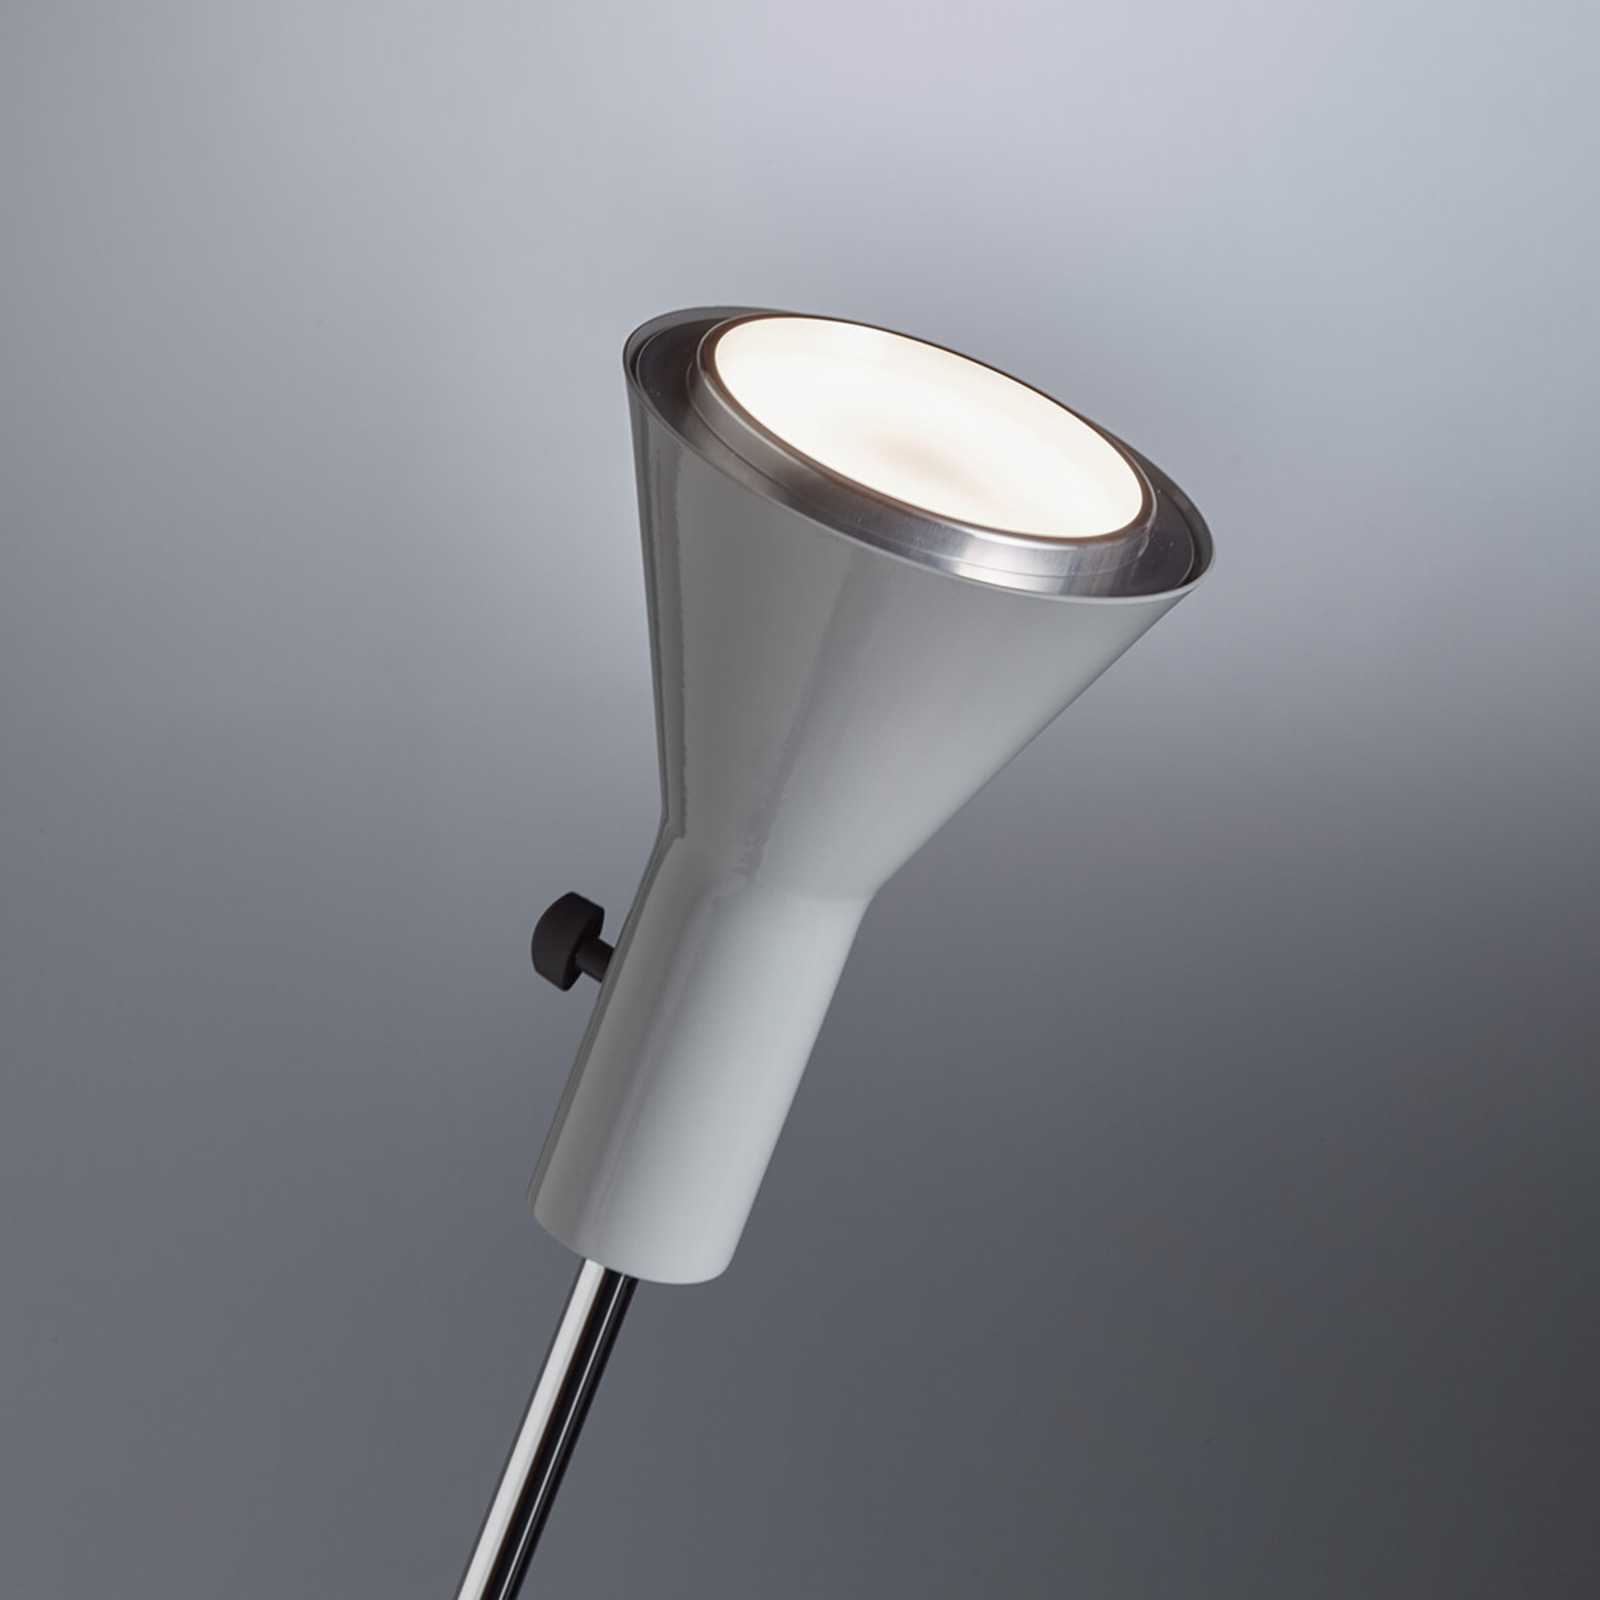 Gru LED floor lamp with built-in dimmer